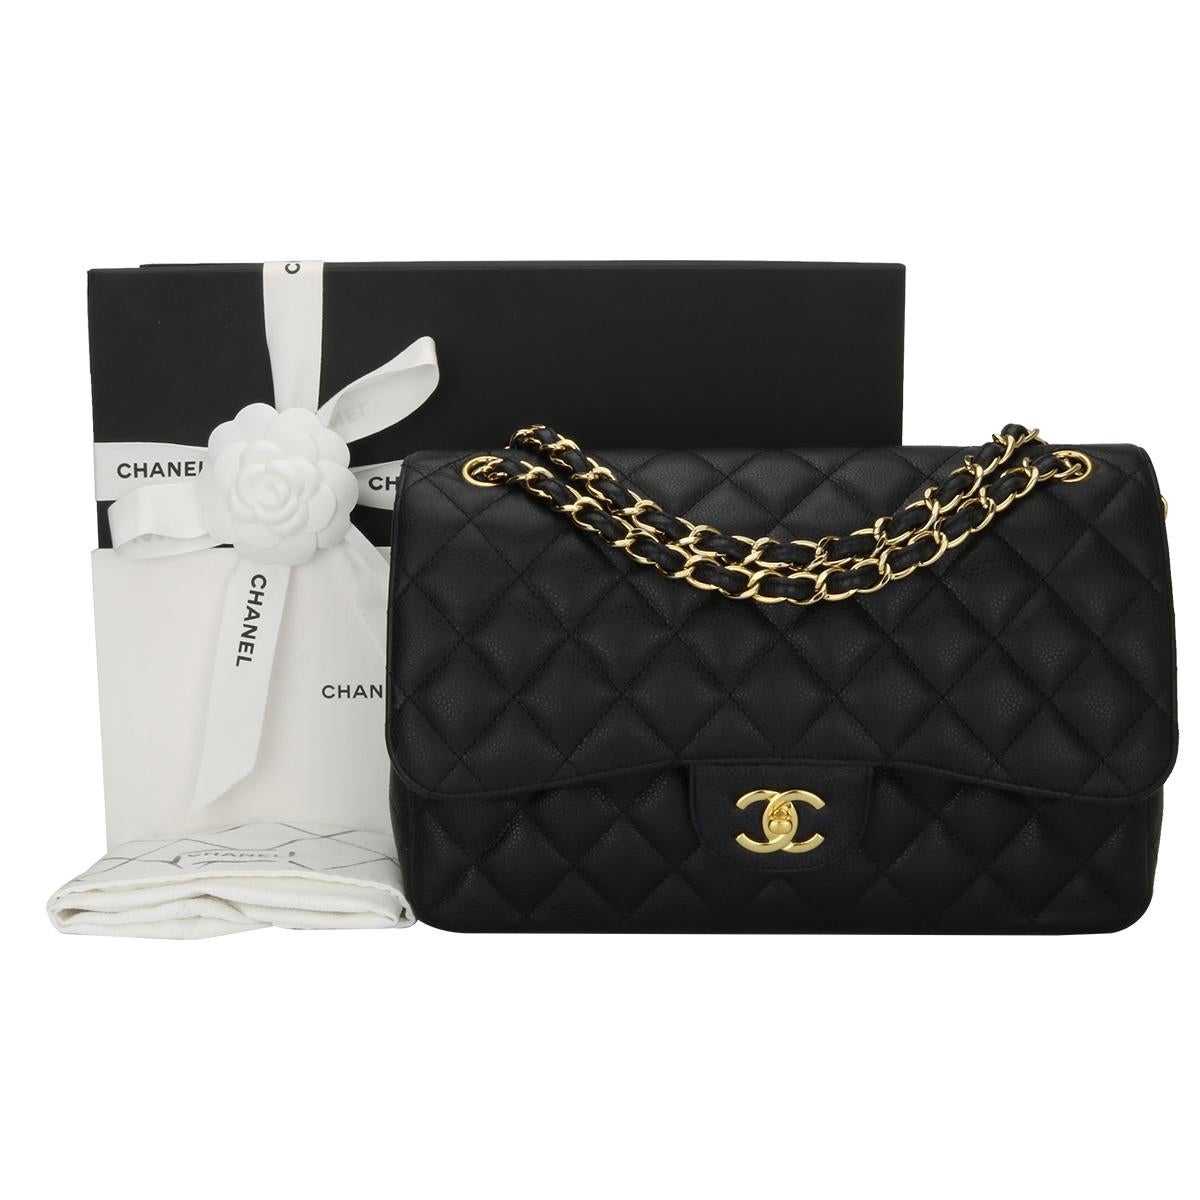 Authentic CHANEL Classic Jumbo Double Flap Black Caviar with Gold Hardware 2014.

This stunning bag is in an excellent condition, the bag still holds its shape very well, and the hardware is still very shiny.

Exterior Condition: Great condition,